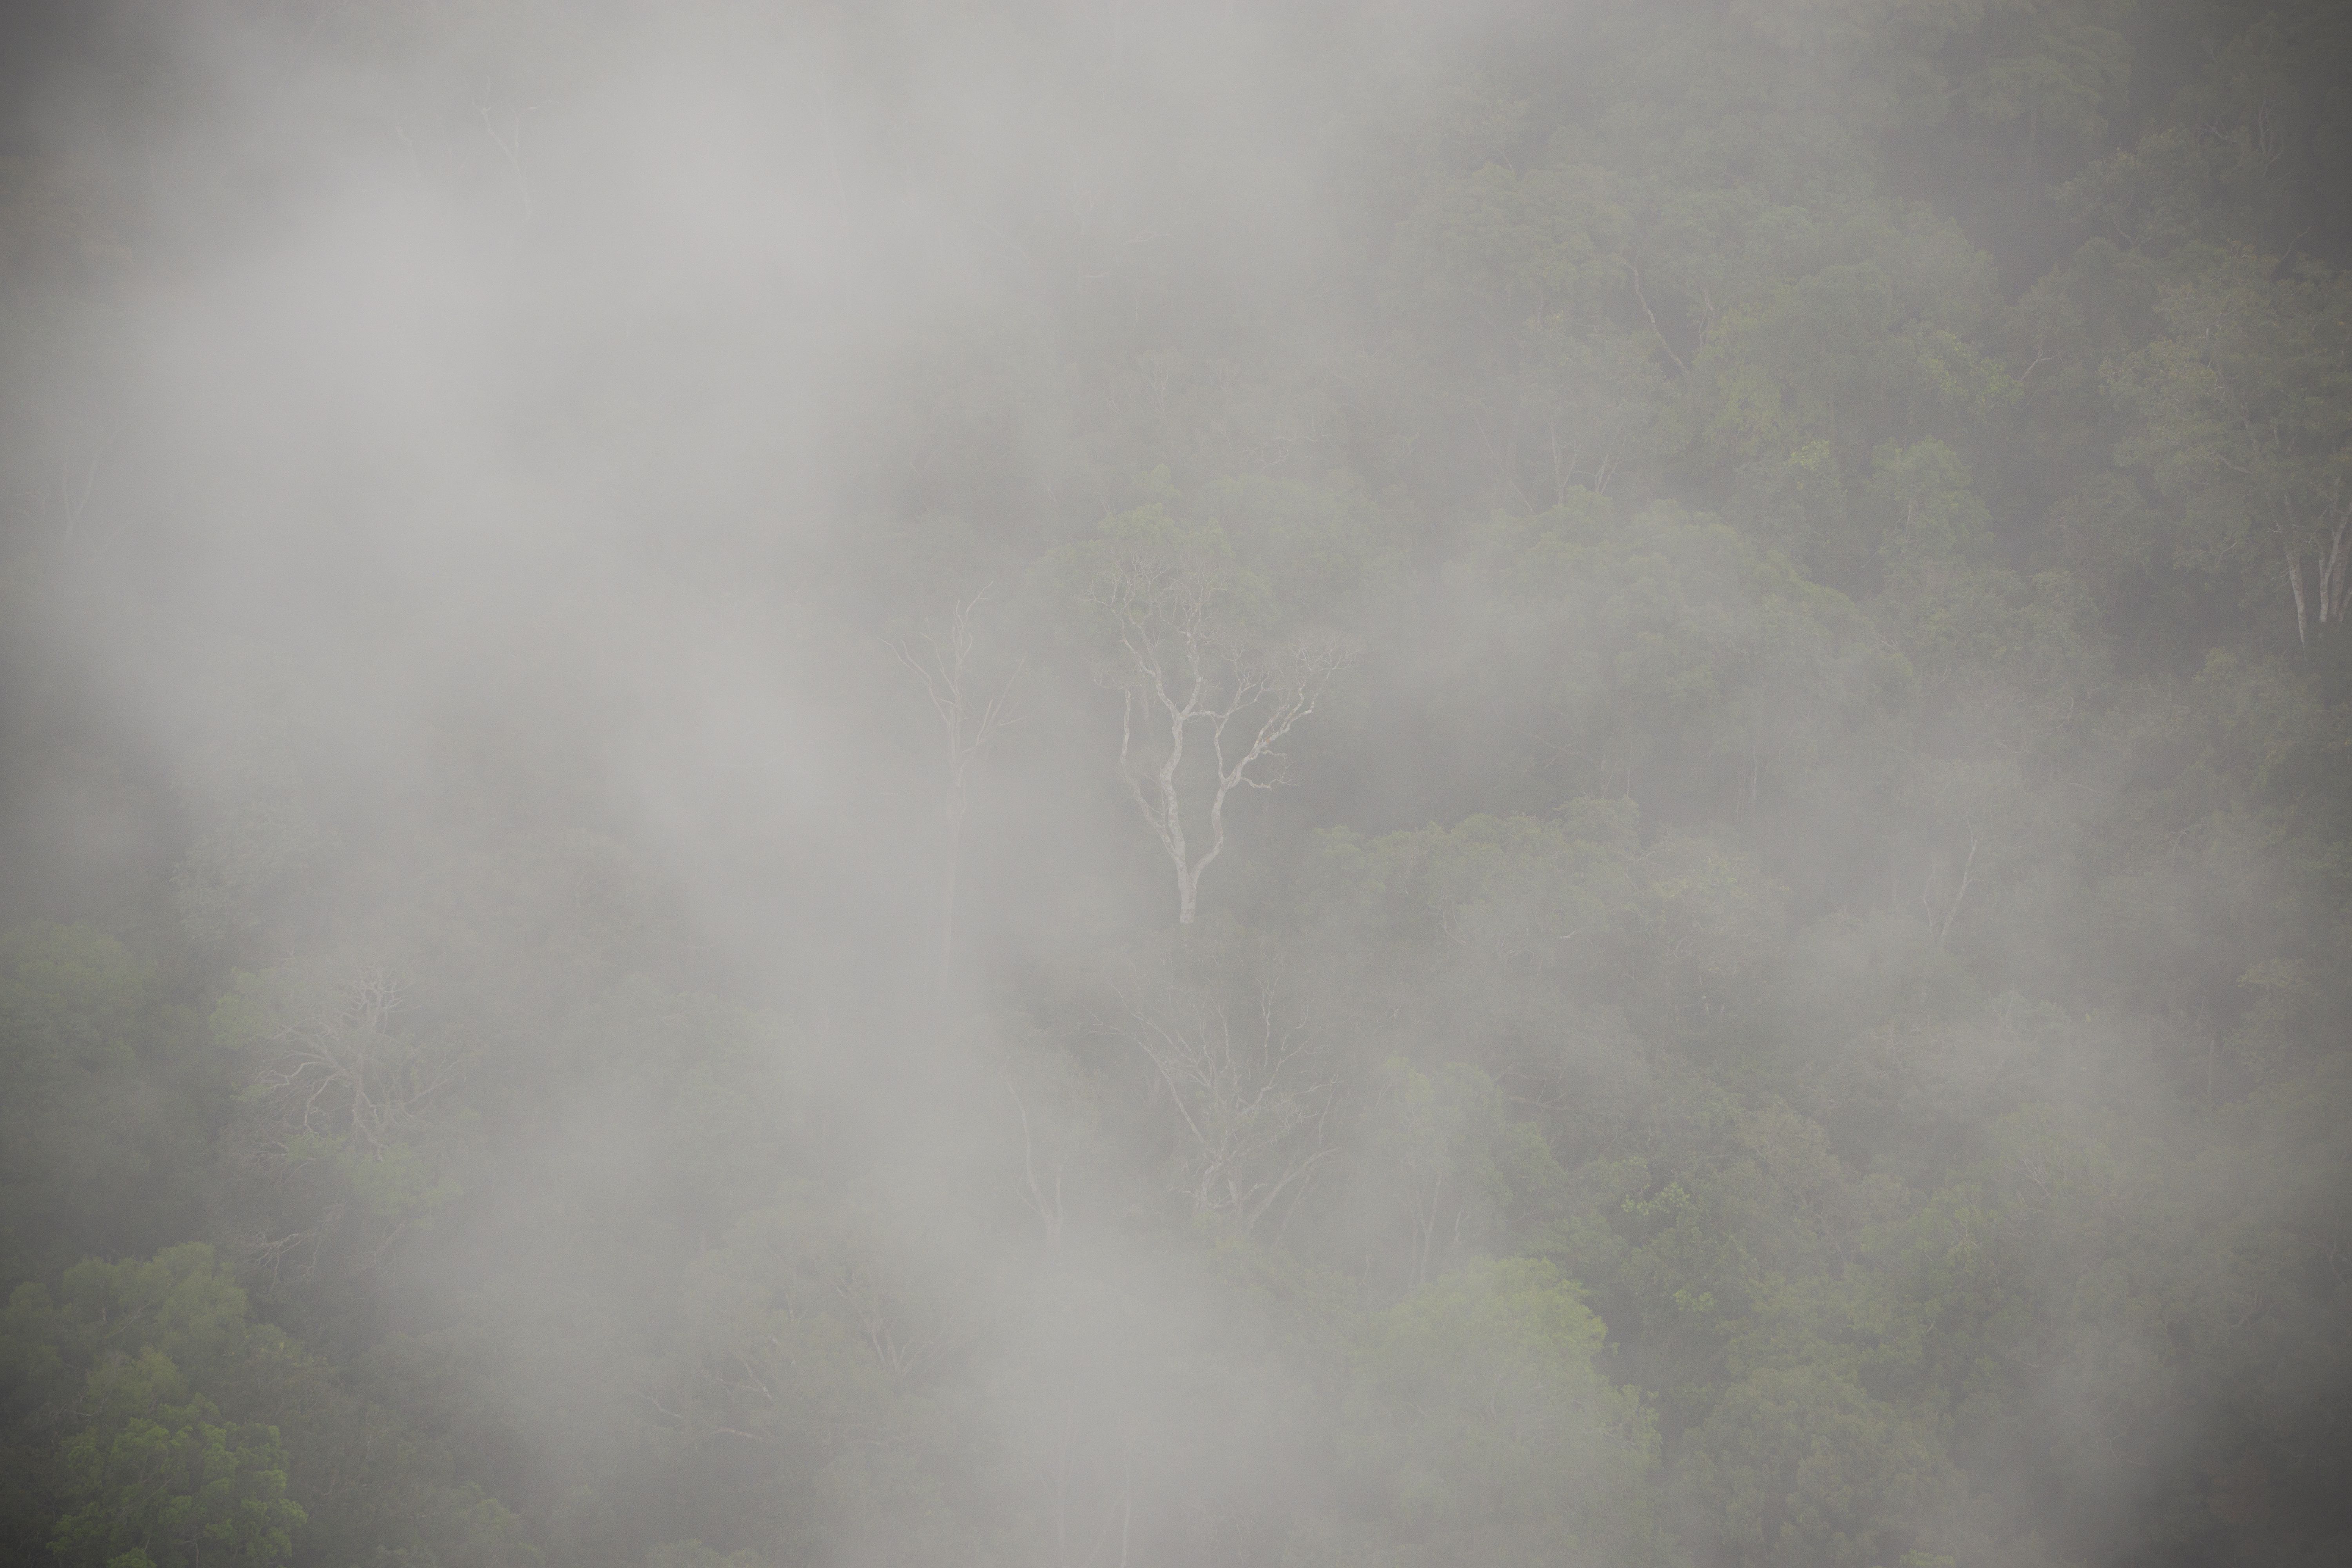 The morning mist as seen from ATTO shows just how much moisture moves up from the rainforest. Image by Umair Irfan. Brazil, 2019.